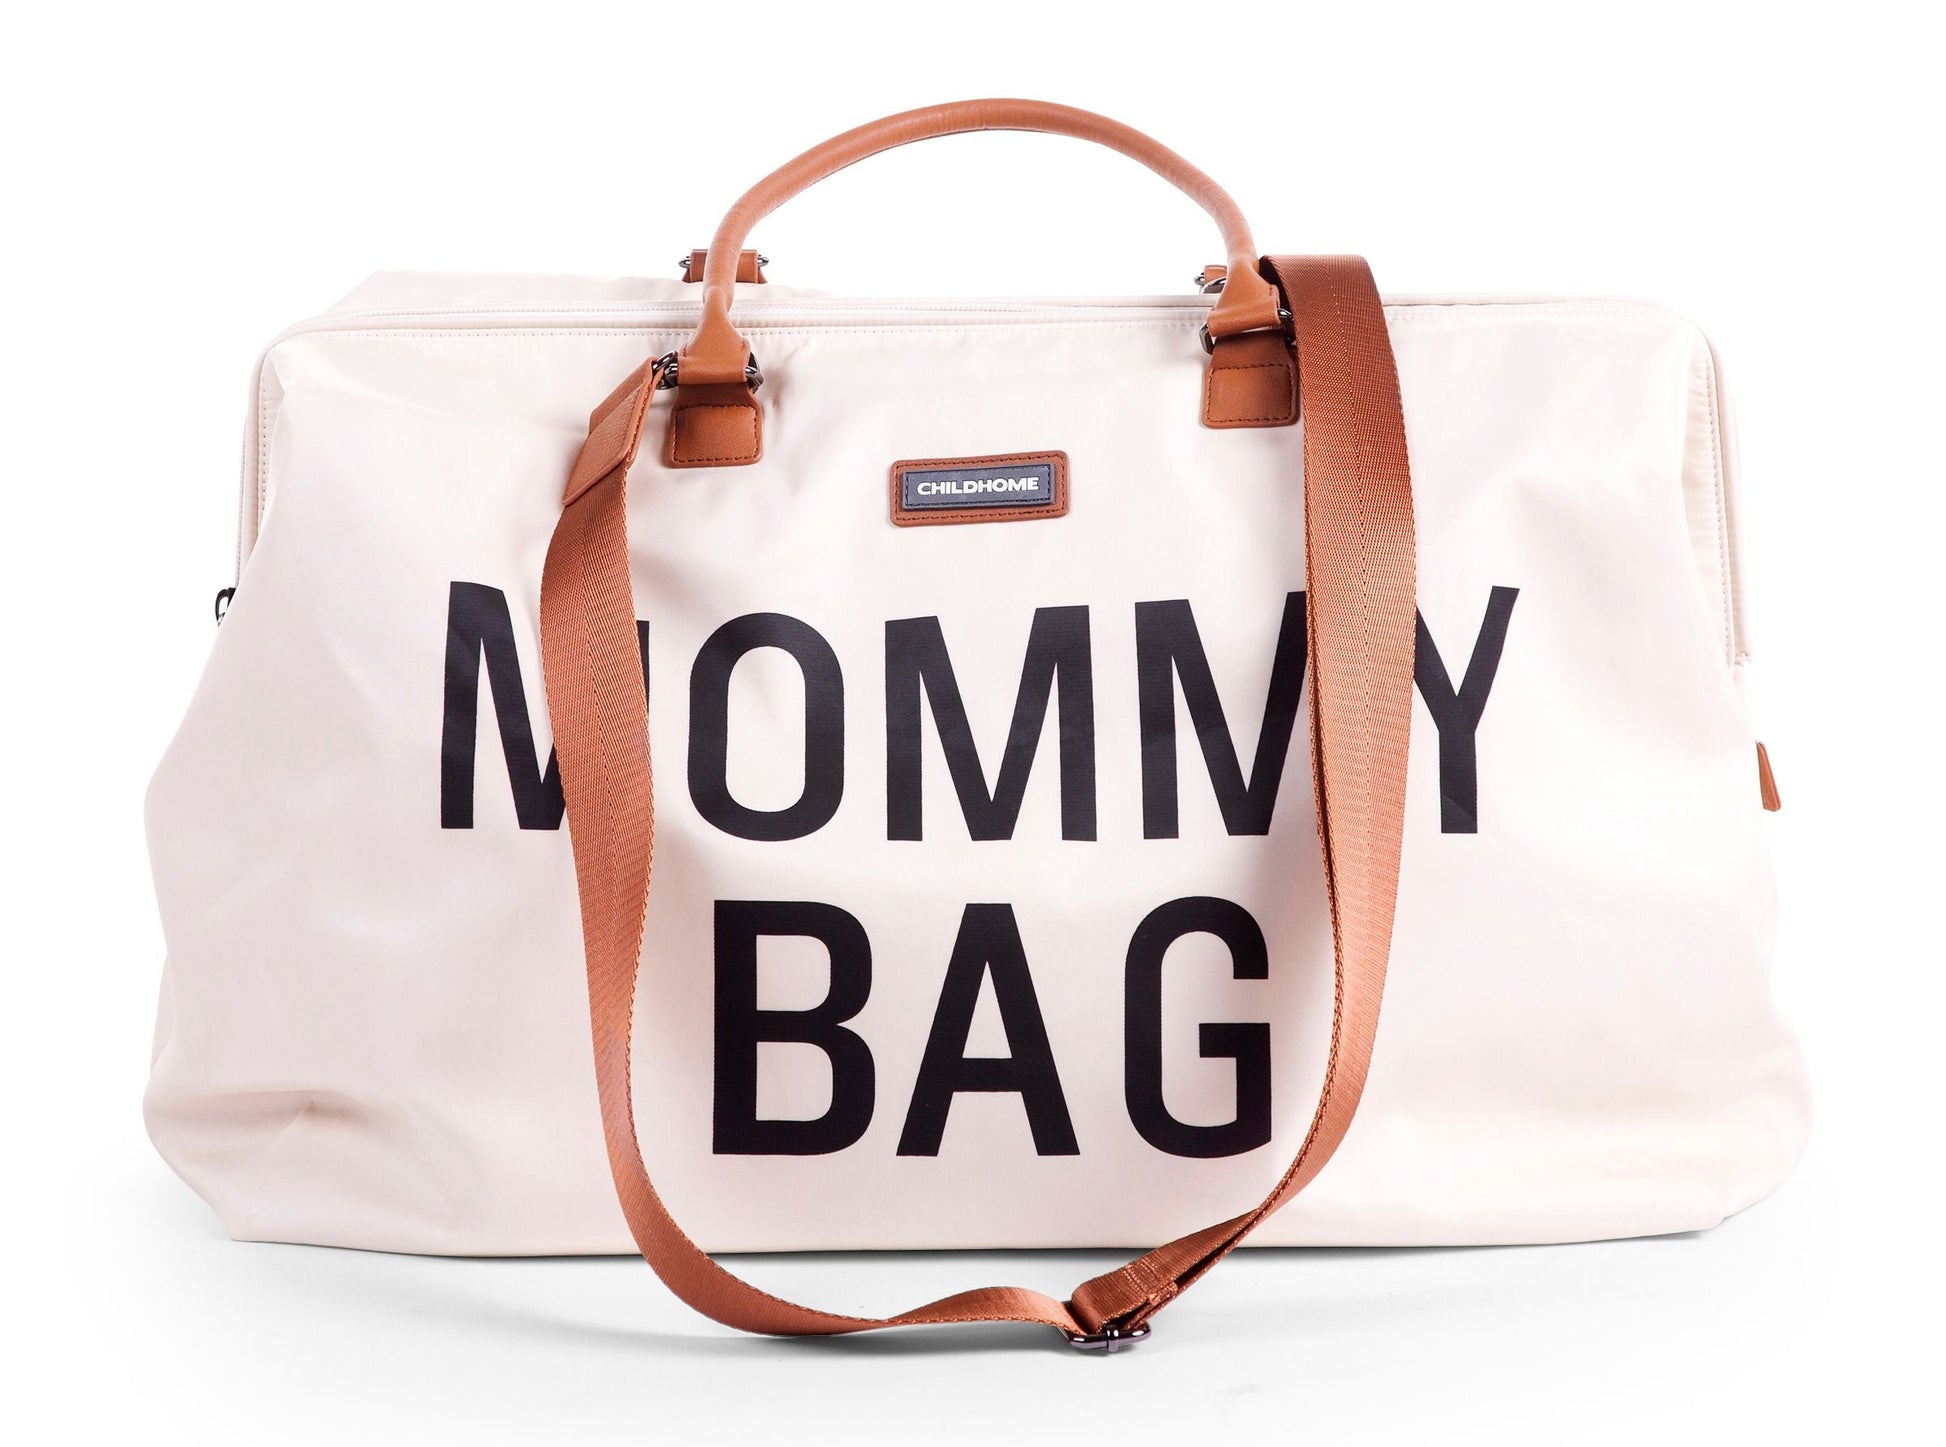 CHILDHOME "Mommy Bag" Altweiss - Siliblu Boutique & Atelier